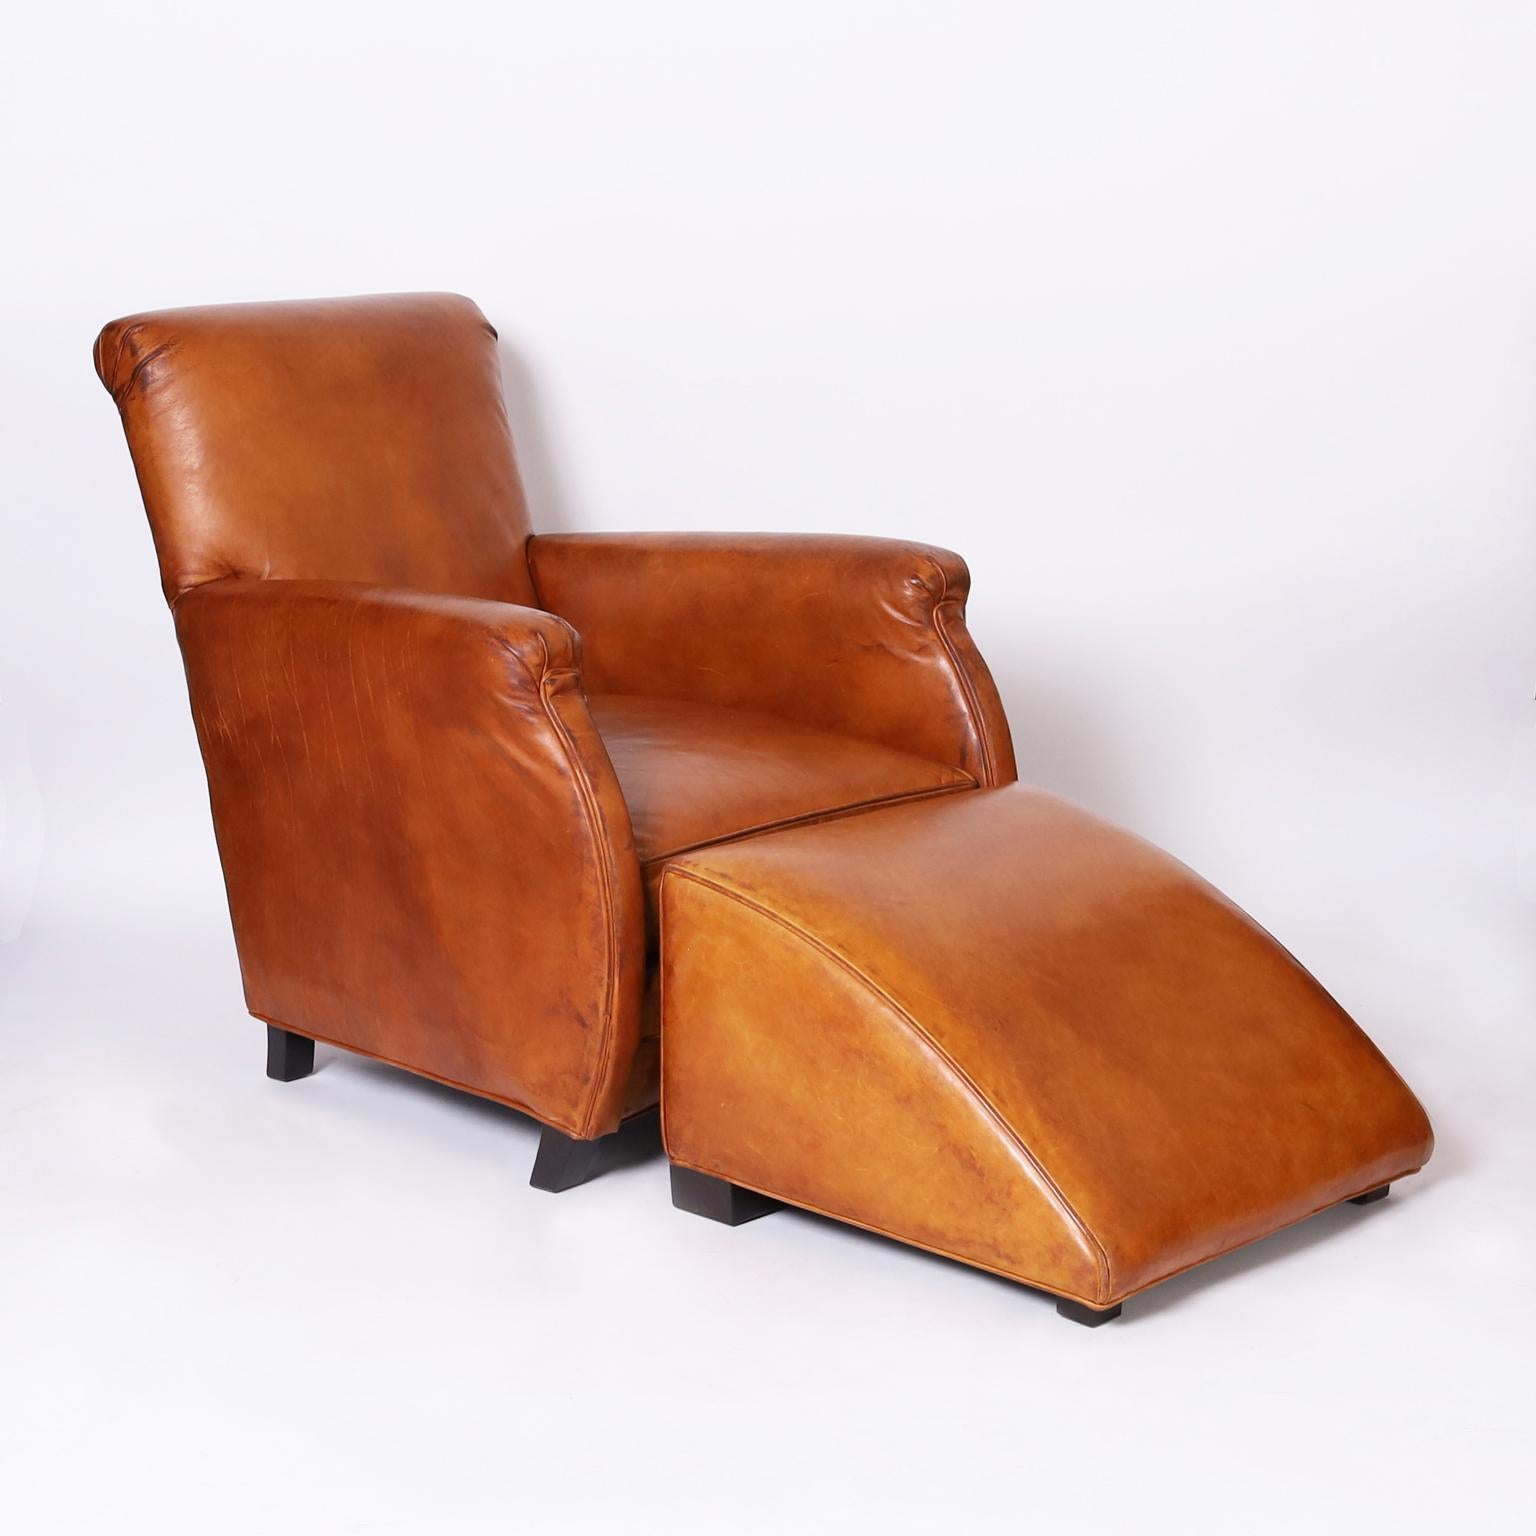 Impressive pair of art deco style armchairs having a classic steamline form upholstered in alluring soft brown leather and sporting matching ottomans. Signed William Allen for Grange.

Chairs: H: 36 W: 29 D: 34 SH: 16
Ottomans: H: 15 W: 22 D: 22